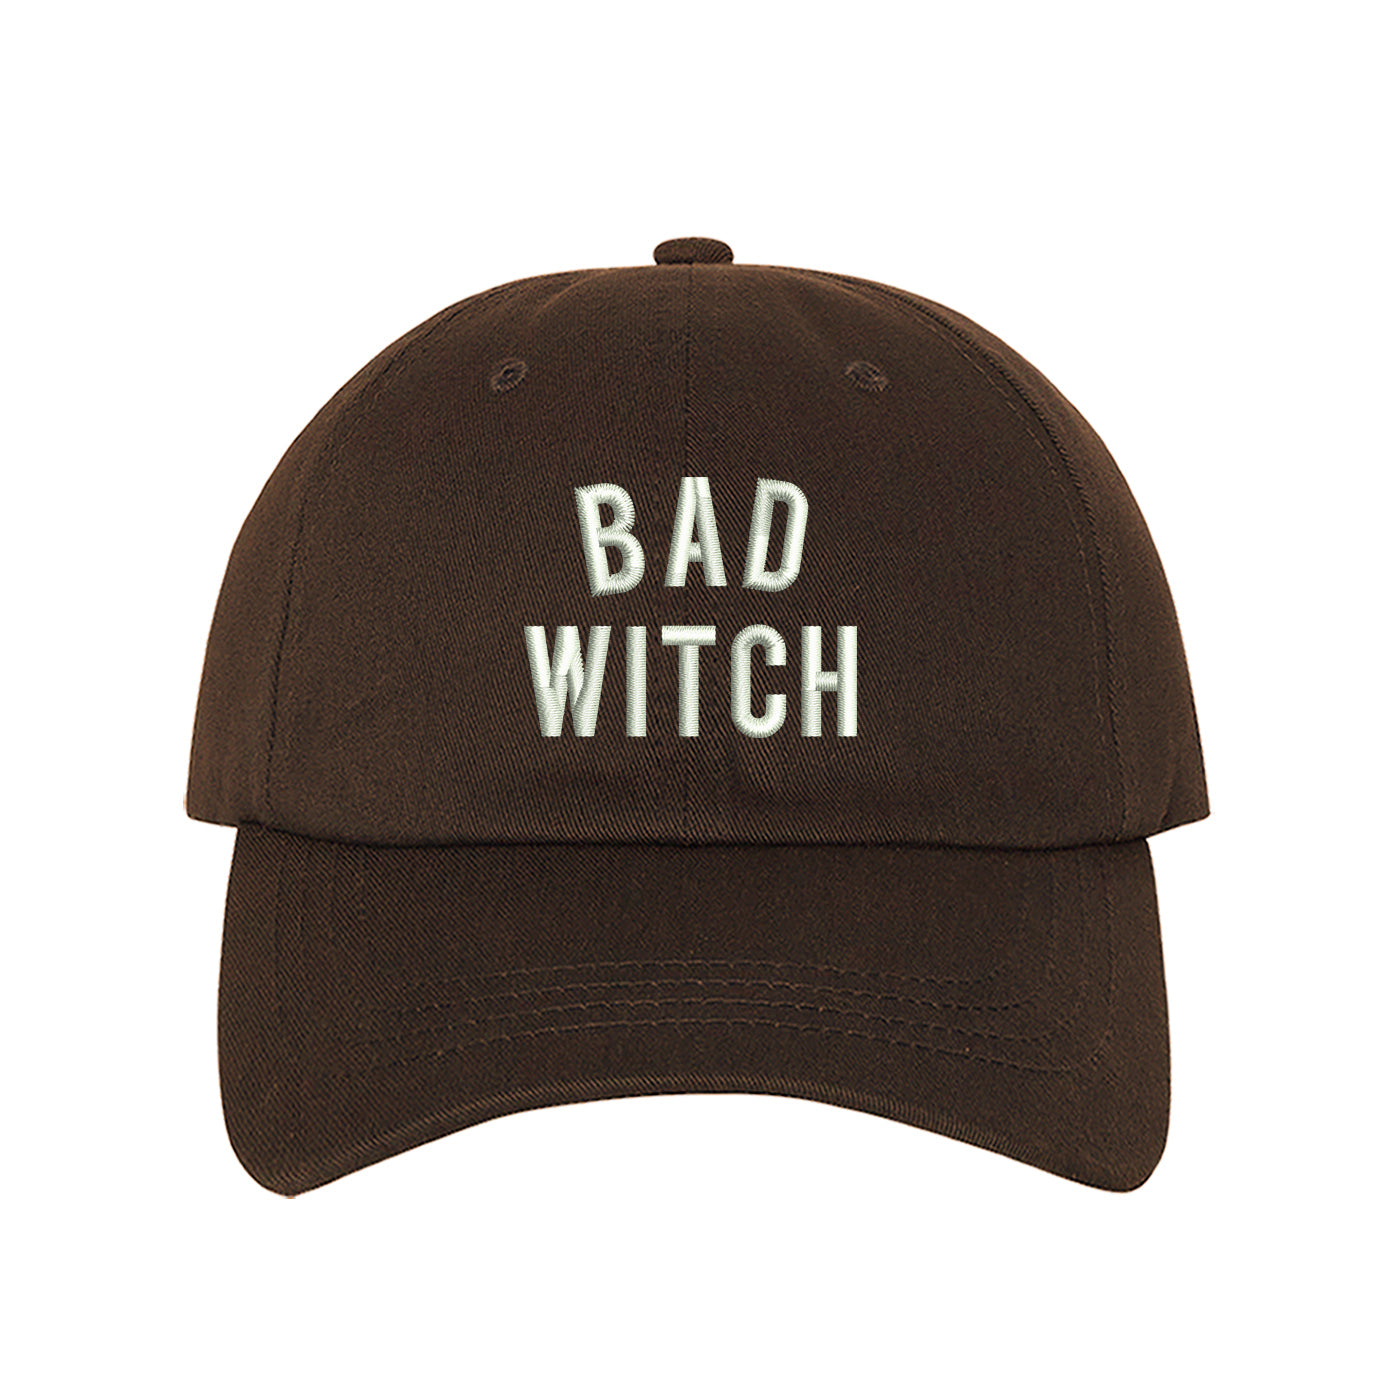 Unisex Bad Witch Dad Hat, Baseball Hat, Bad Witch Hats, Witch, Embroidered Hat, Embroidered Bad Witch, Custom Embroidery, DSY Lifestyle Hats, Brown Dad Hat, Made in LA